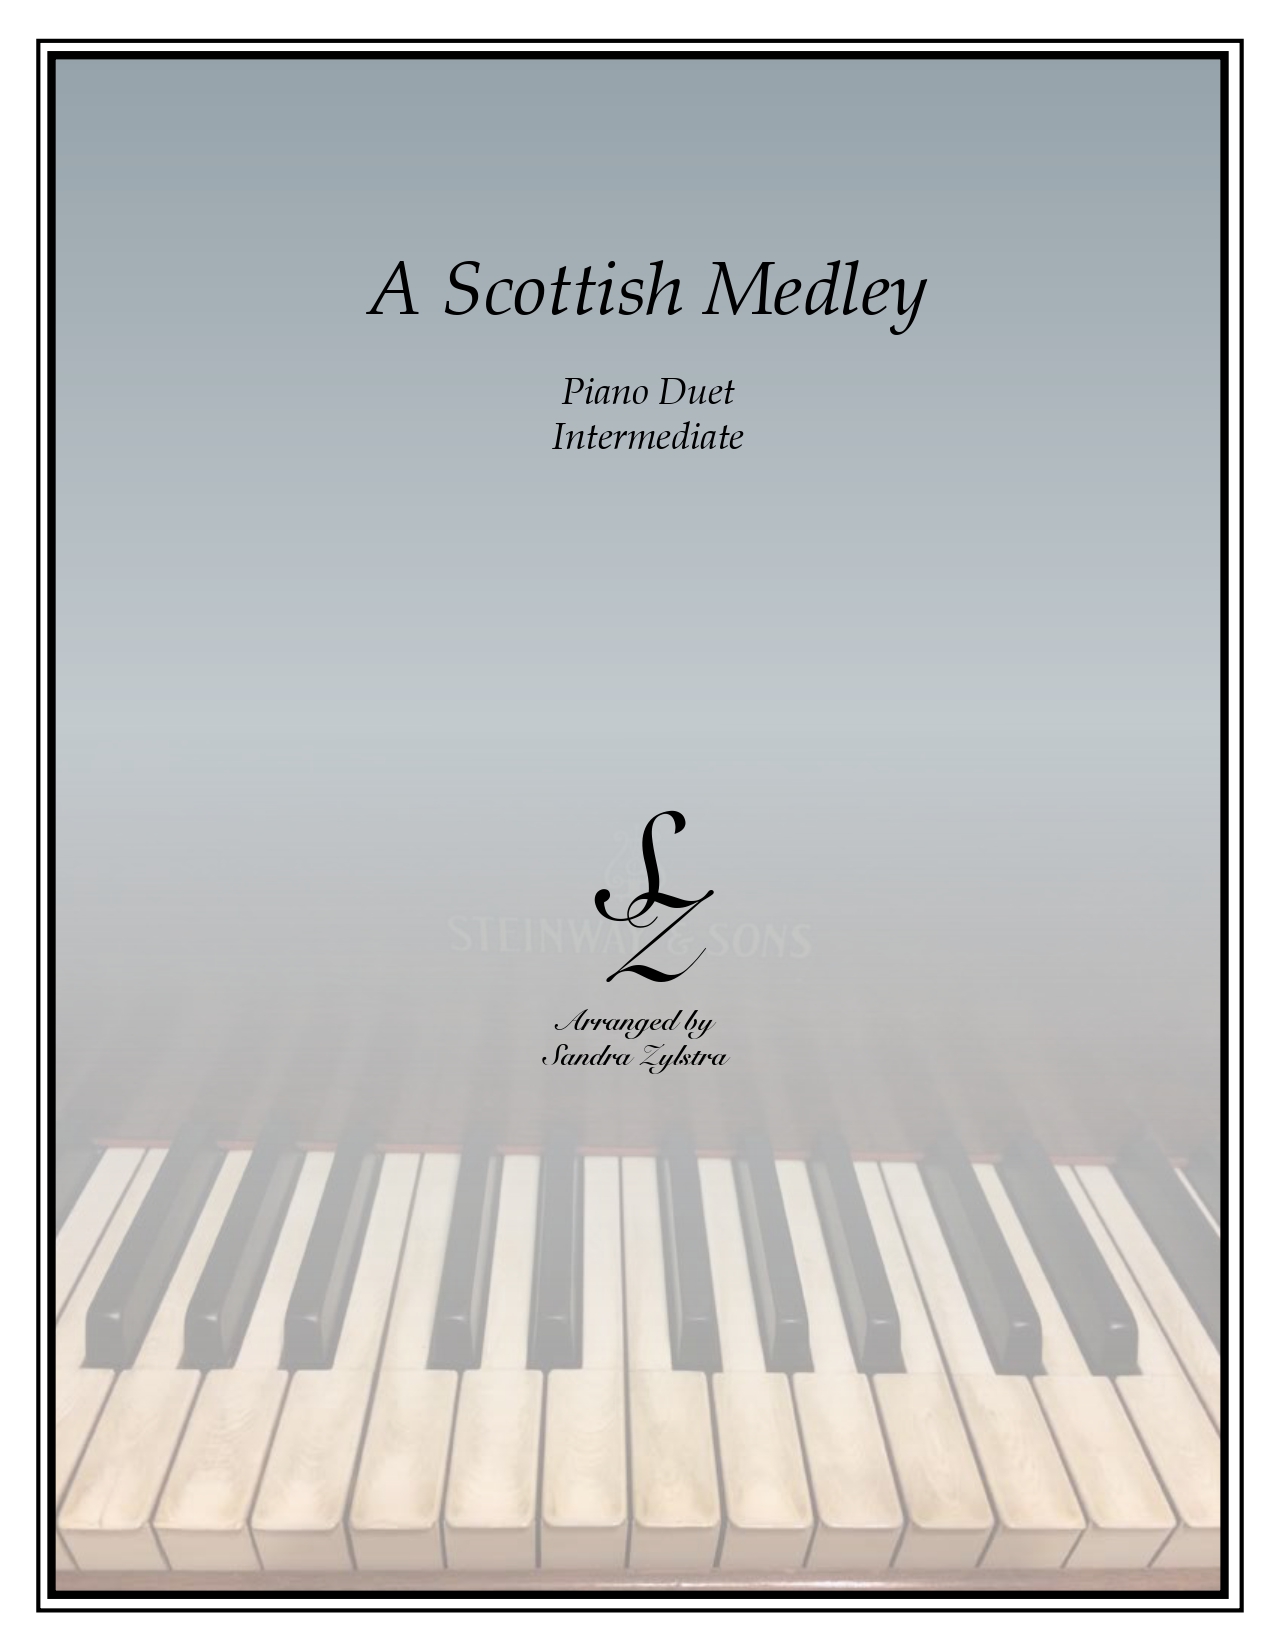 A Scottish Medley intermediate duet cover page 00011